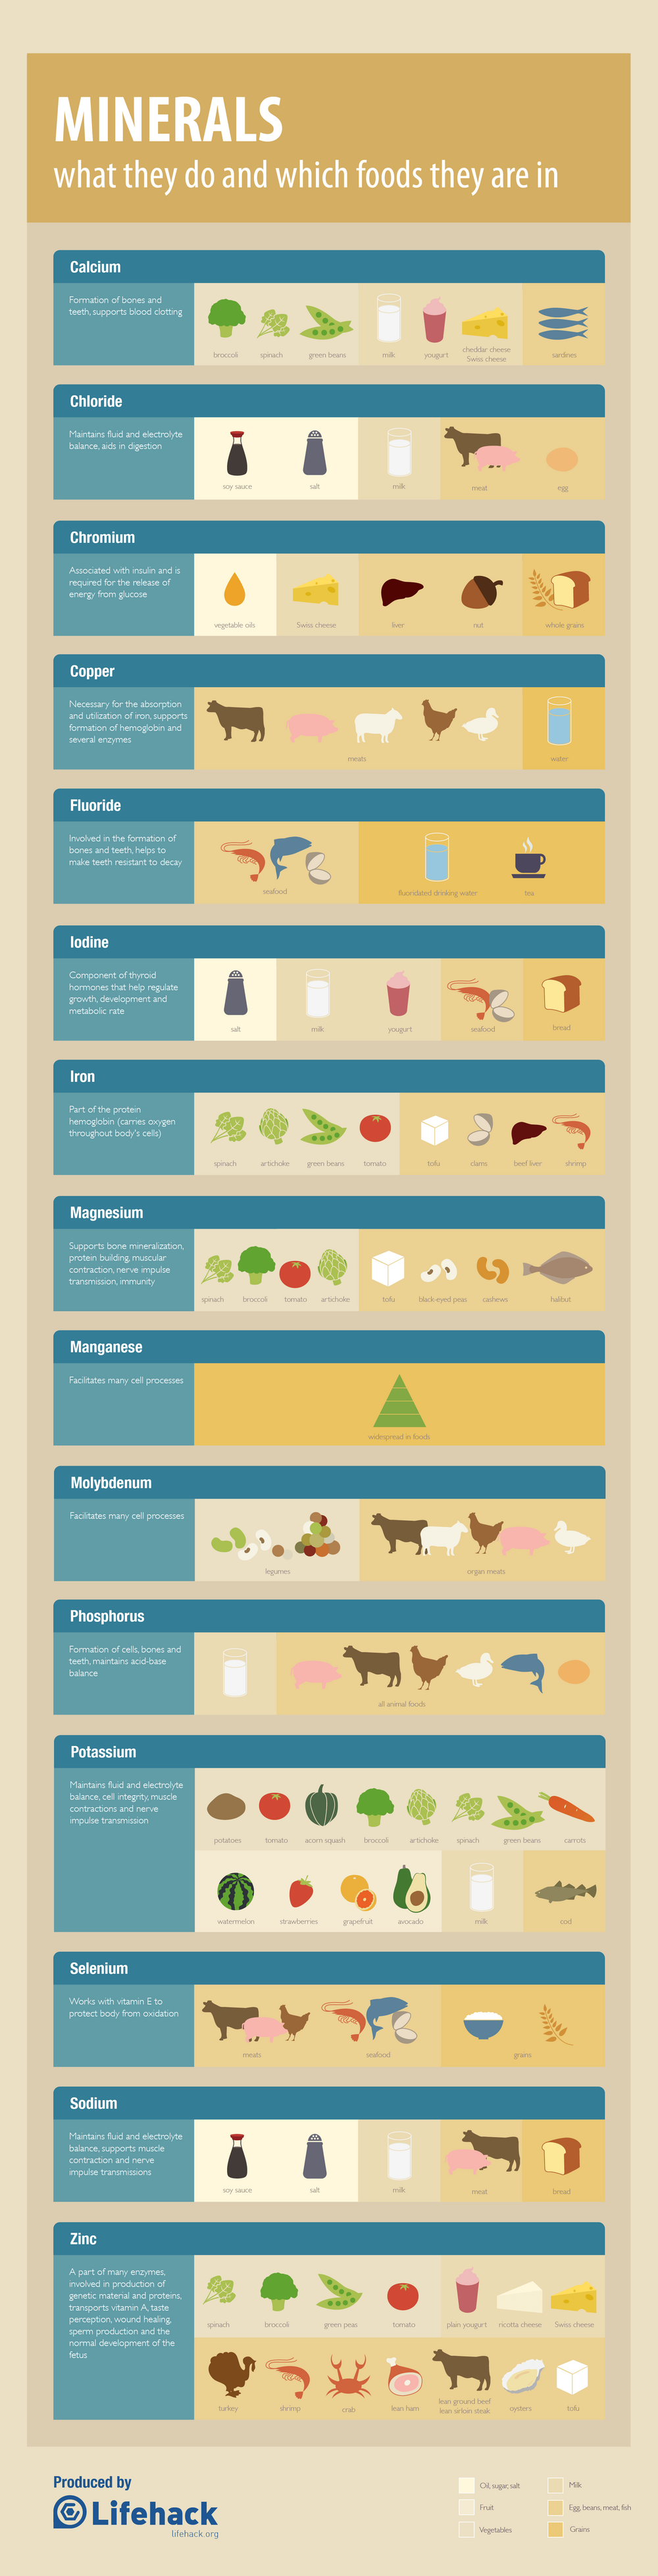 Minerals: What They Do And Which Foods They Are In - Infographic